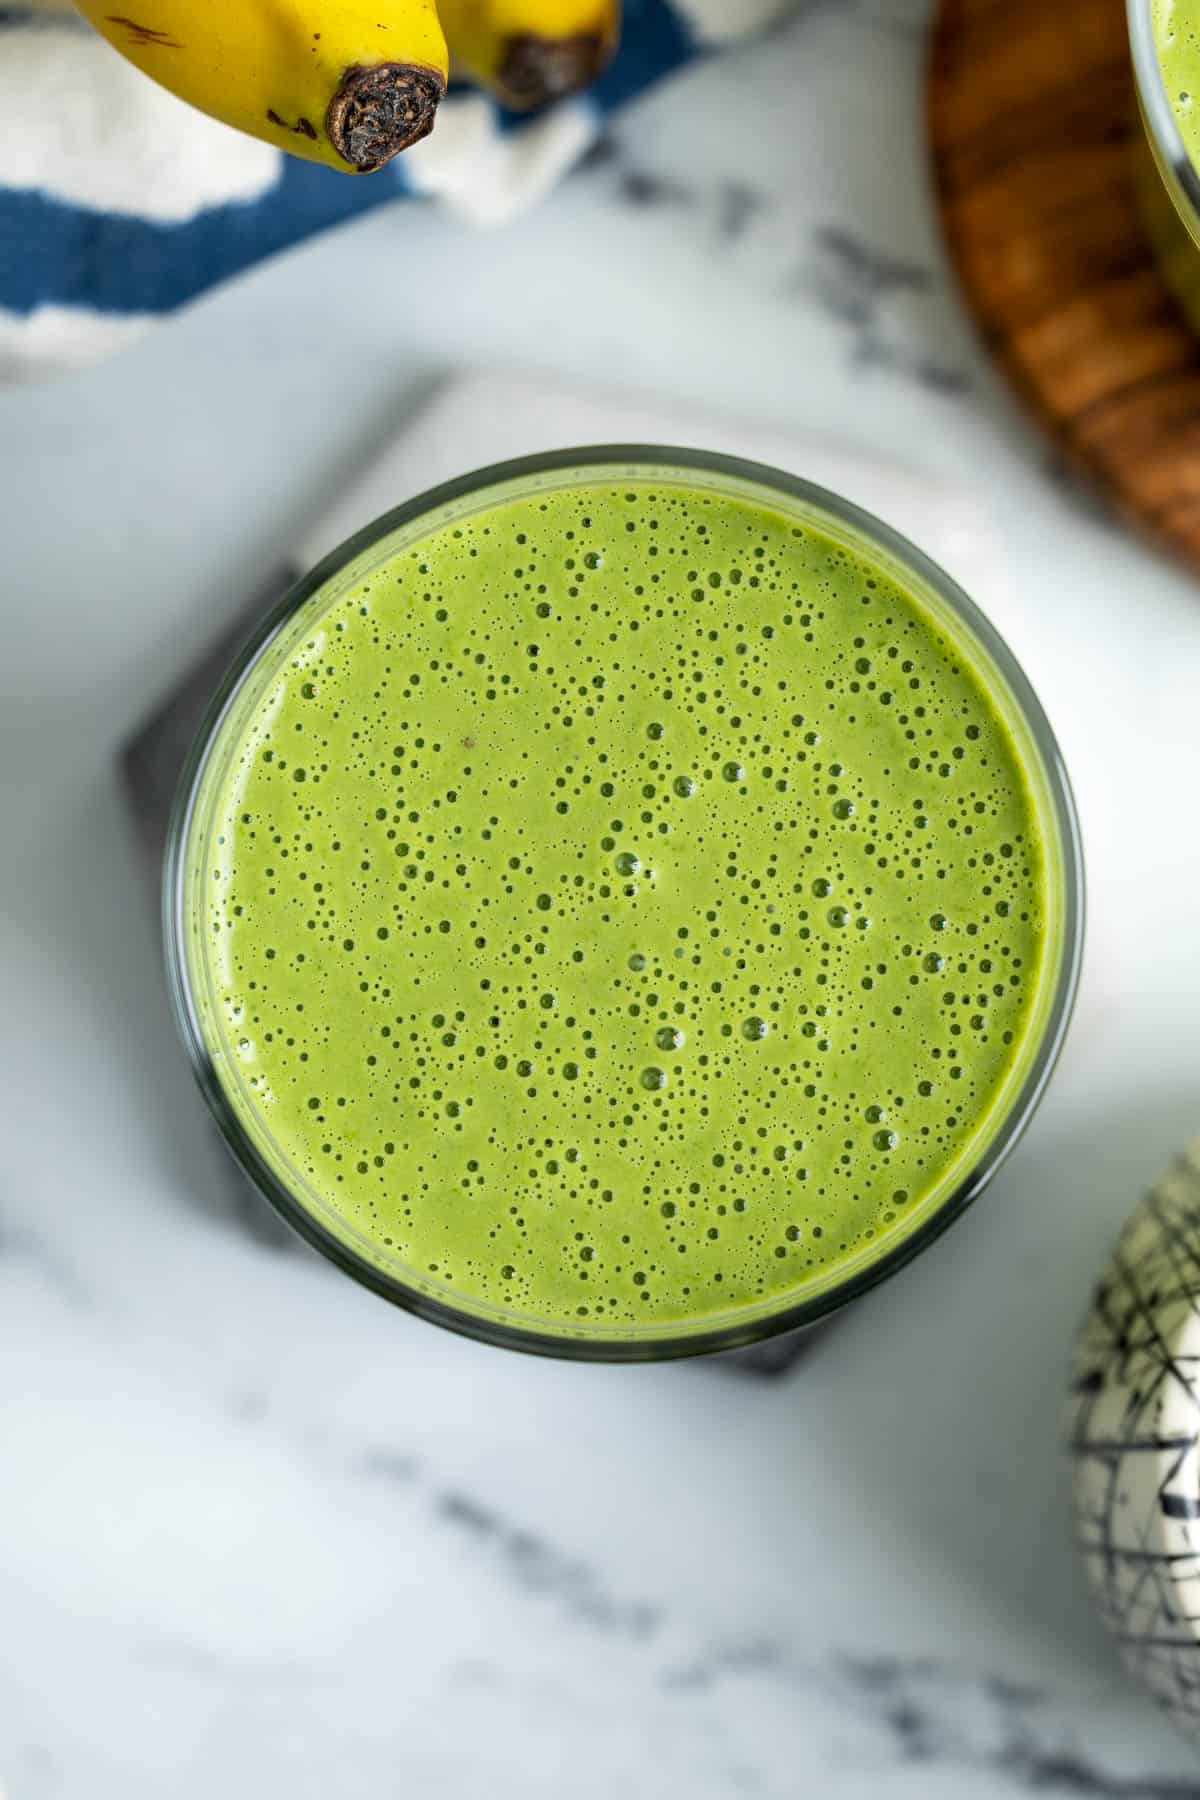 A well-blended collard greens smoothie in a glass with lots of bubbles.